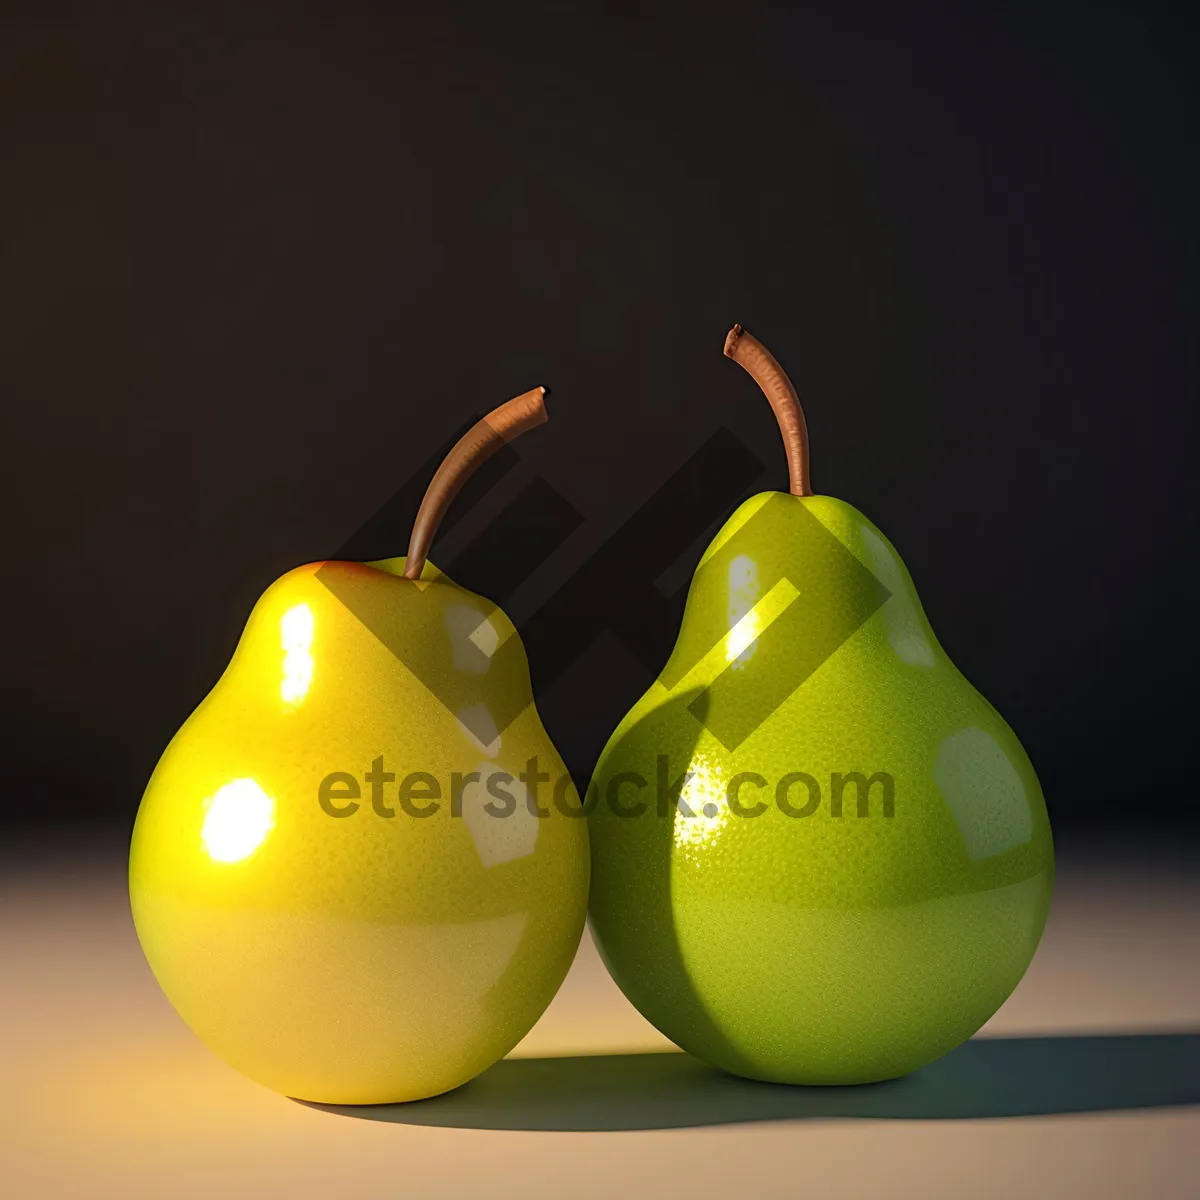 Picture of Juicy Yellow Pear - Fresh & Healthy Fruit